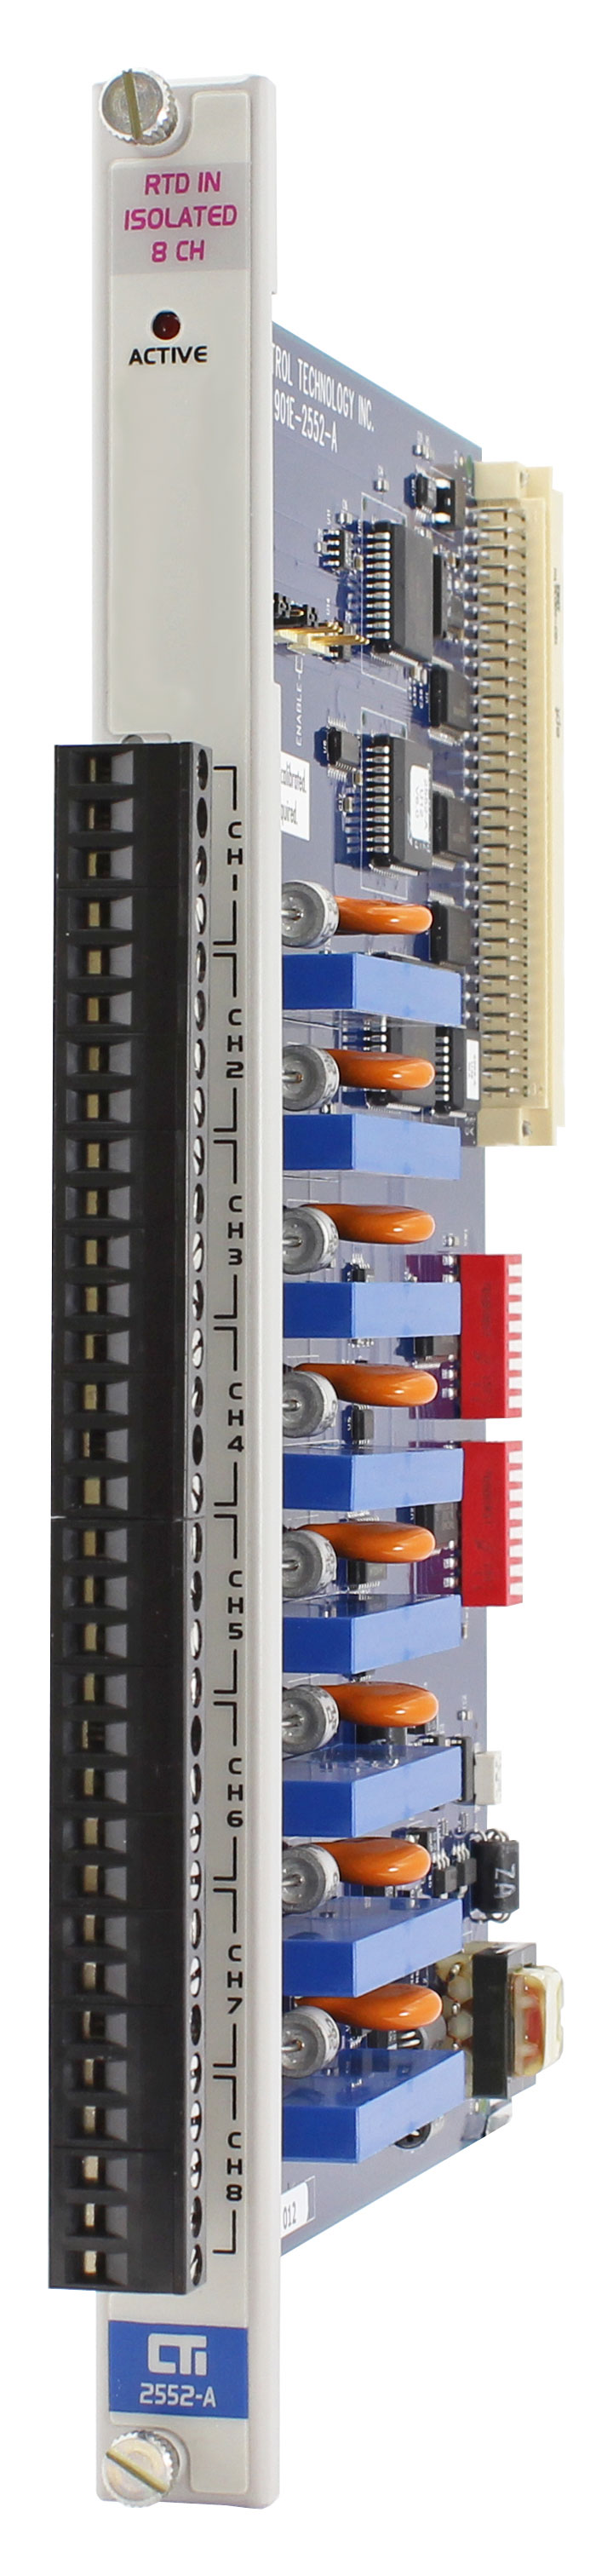 2552-A 8-Channel Isolated RTD Input Module